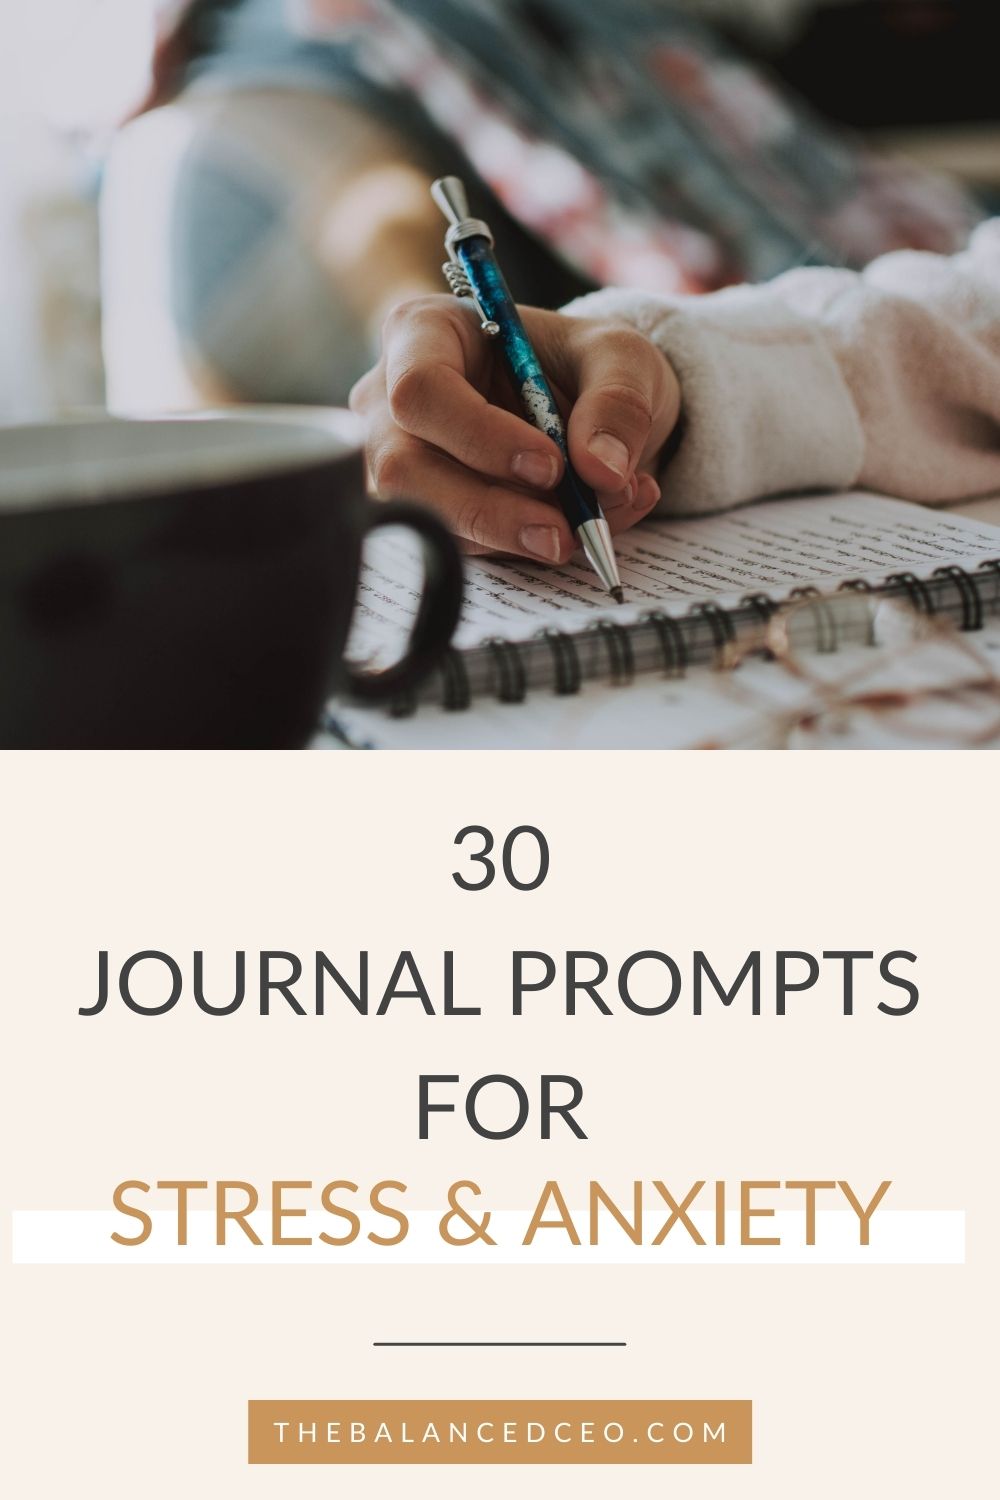 30 Journal Prompts for Stress and Anxiety - The Balanced CEO